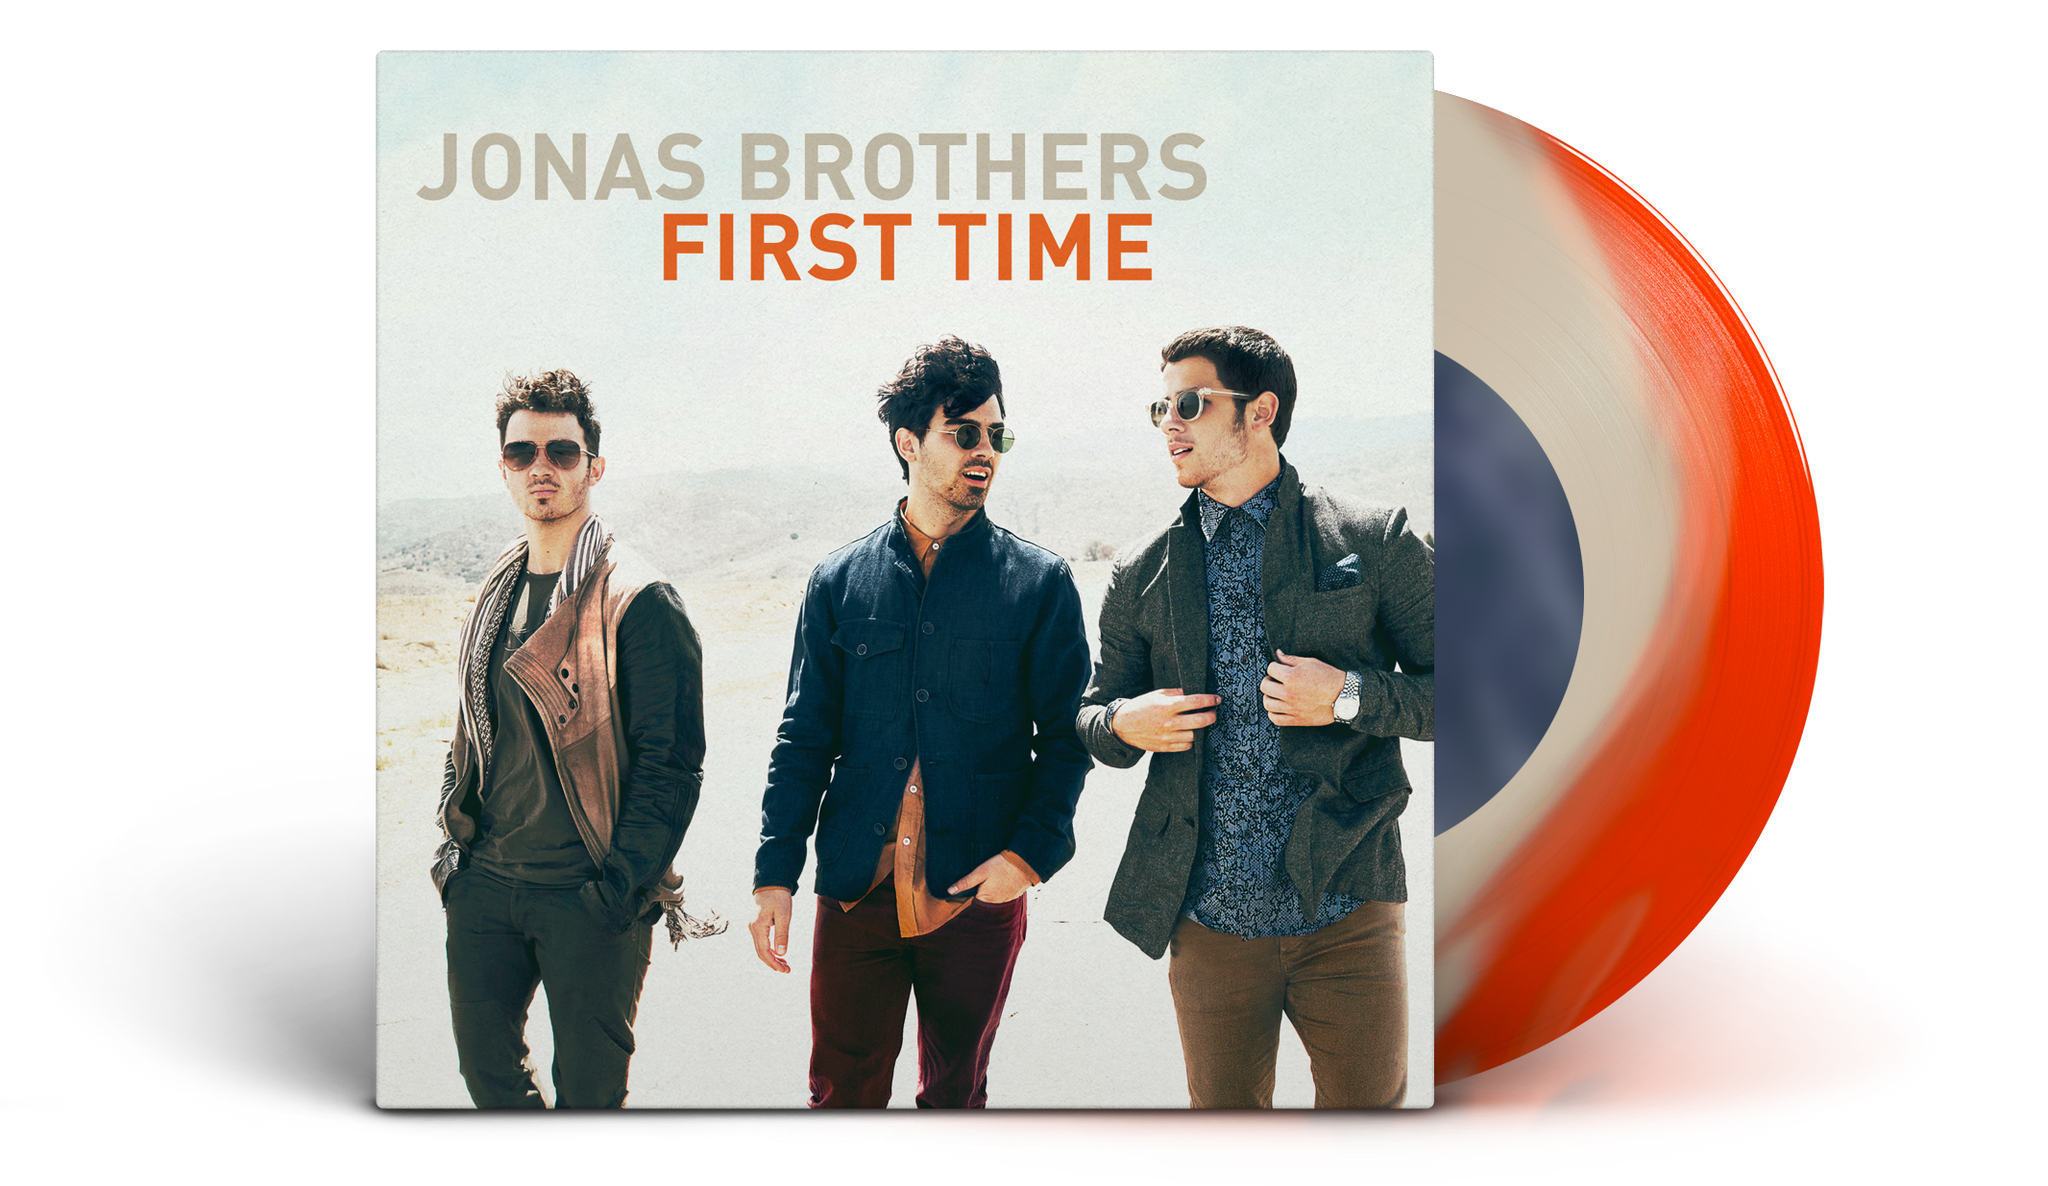 EXCLUSIVE "V" BUNDLE: Jonas Brothers "V" LP (clear vinyl) + Pom Poms (yellow & red splatter vinyl) 10 inch single! + First Time 7 inch single!